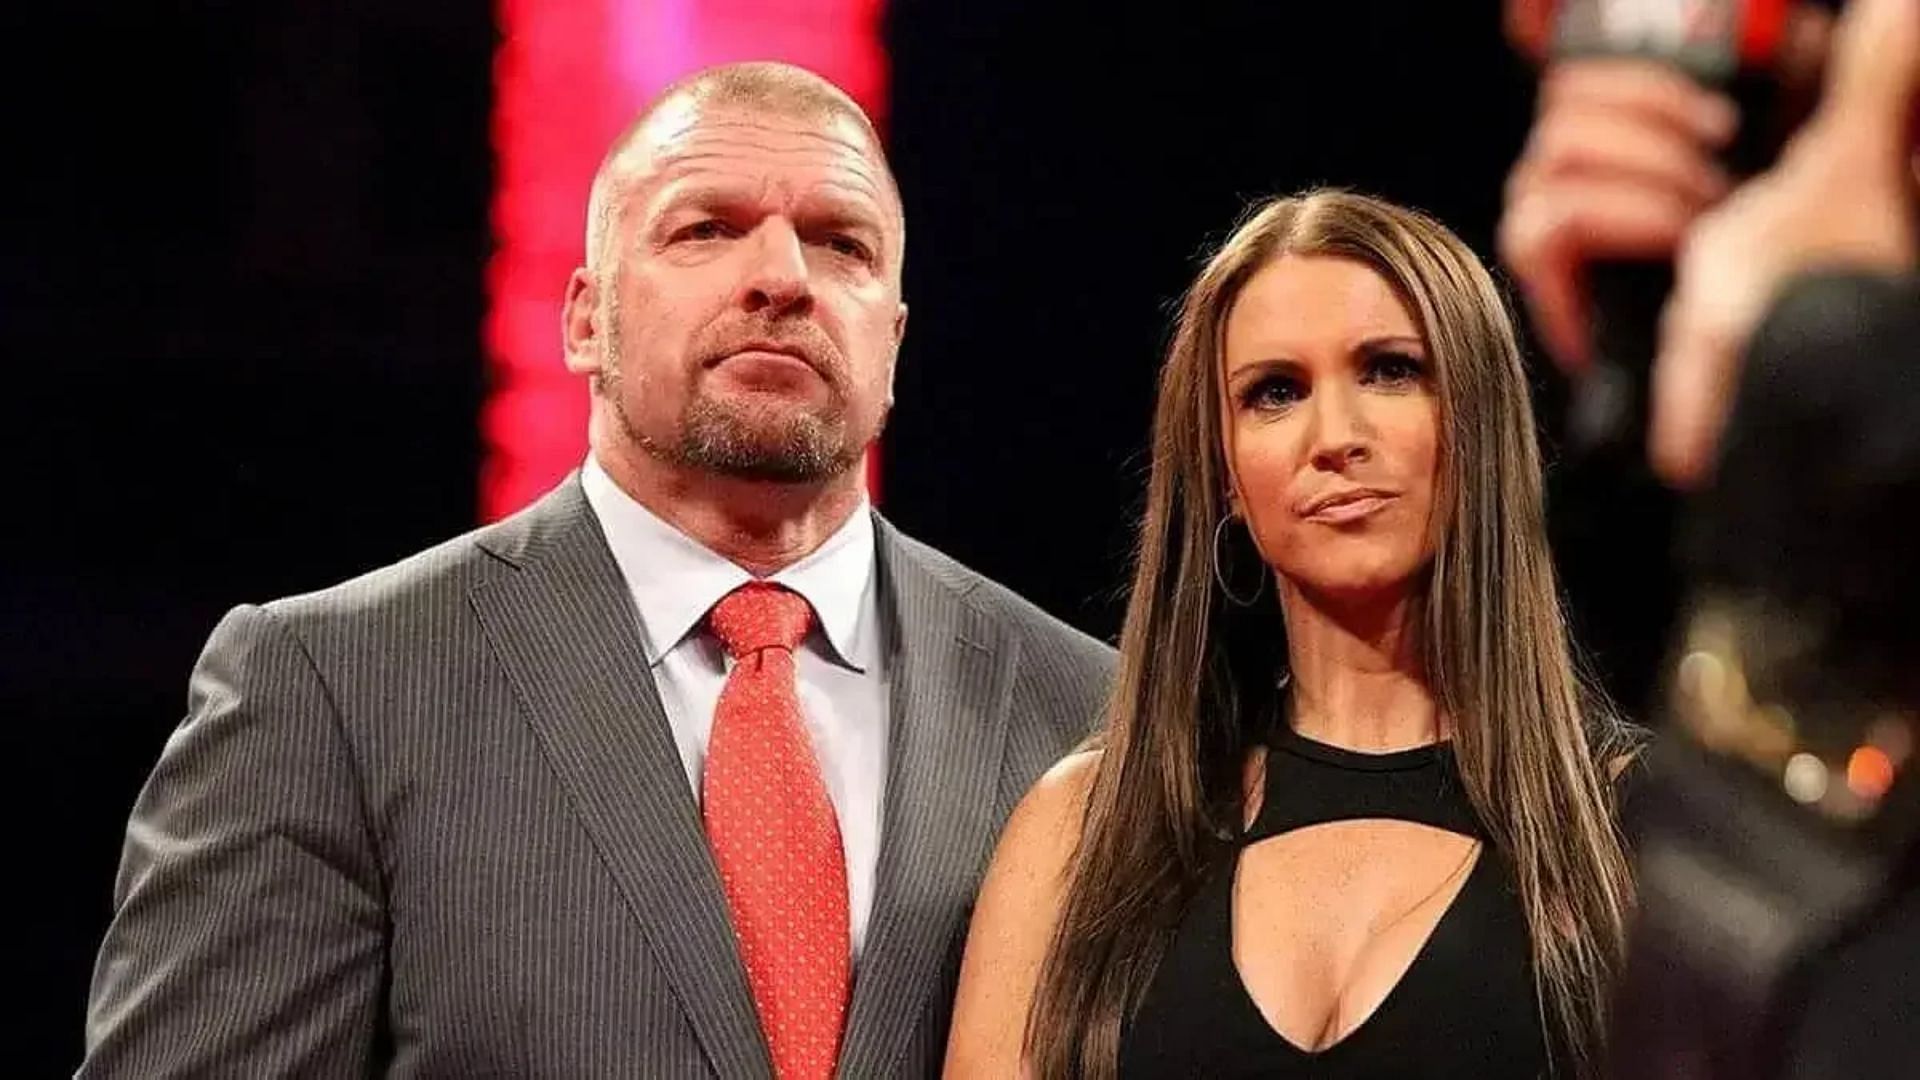 Would Triple H and Stephanie McMahon dare to step into the ring with this former WWE name?